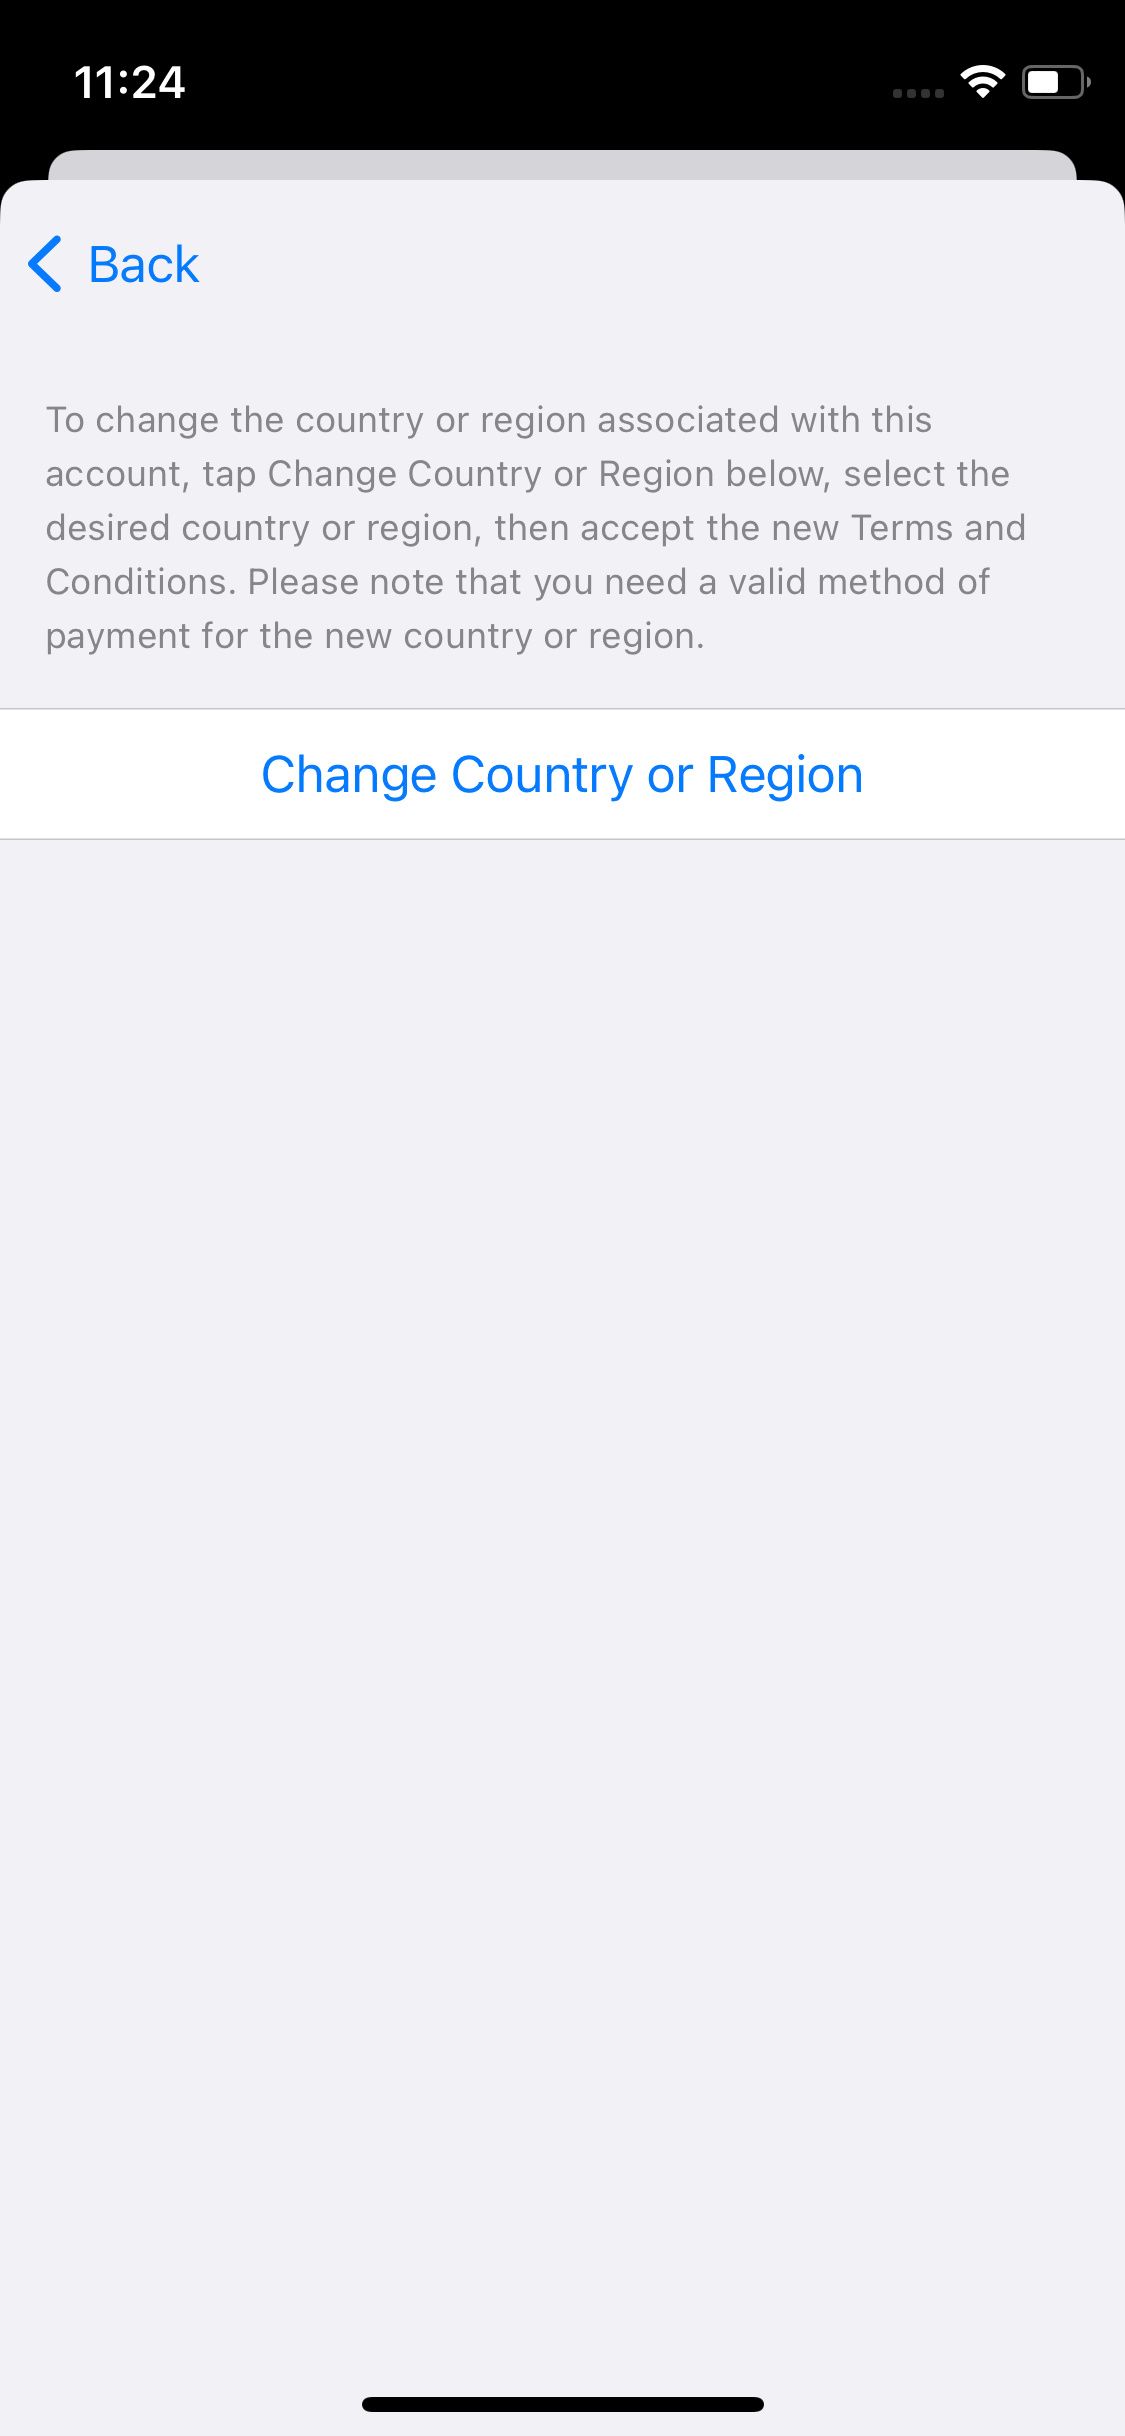 Change Country or Region option on iPhone